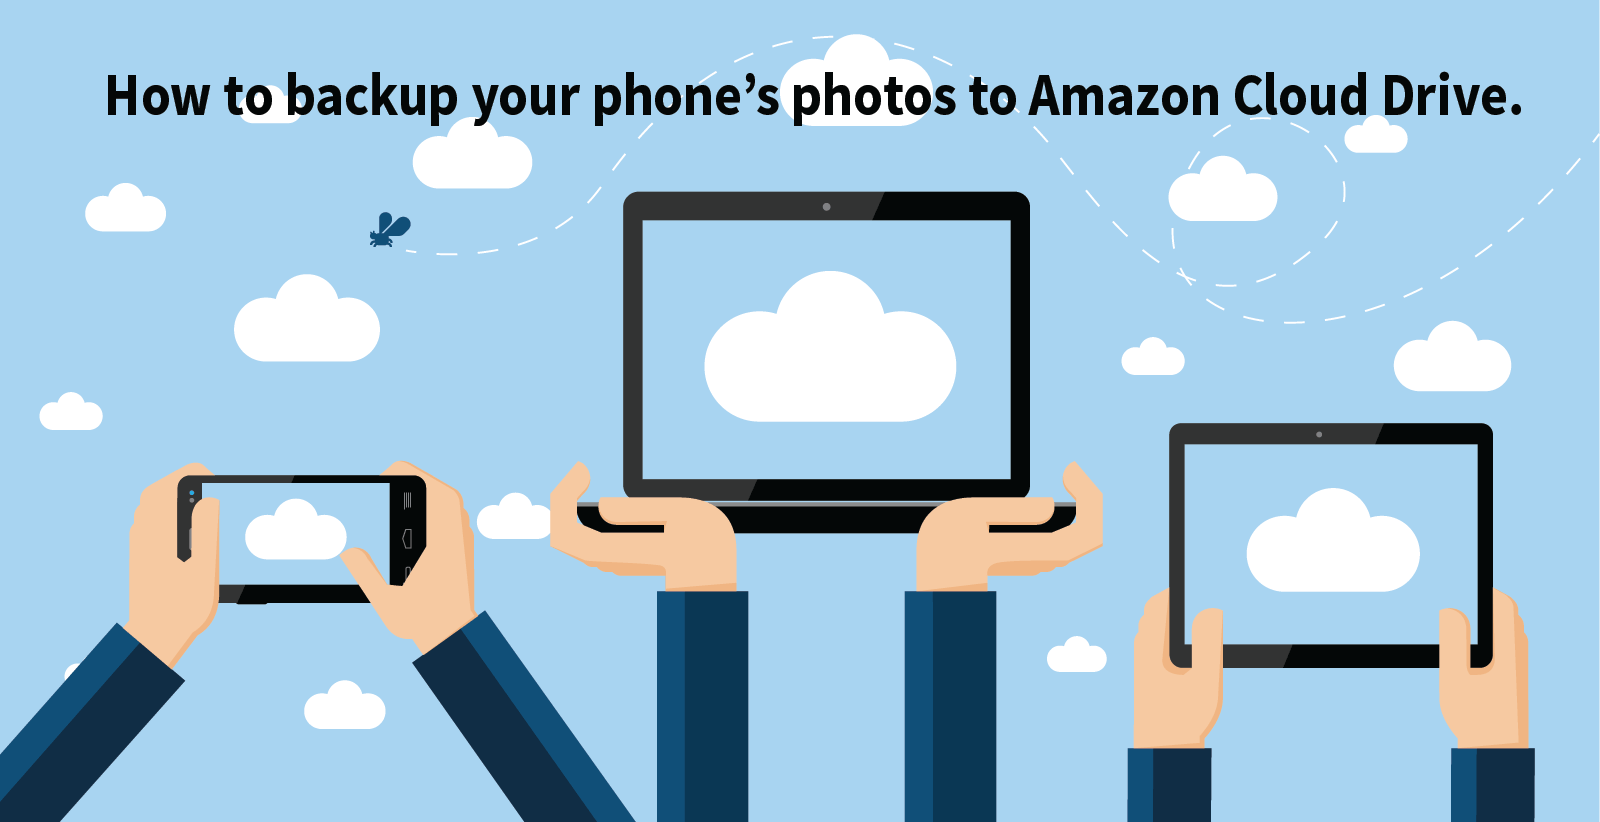 How to Backup Your Phone's Photos to Amazon Cloud Drive » Tech Tips » Surfnetkids